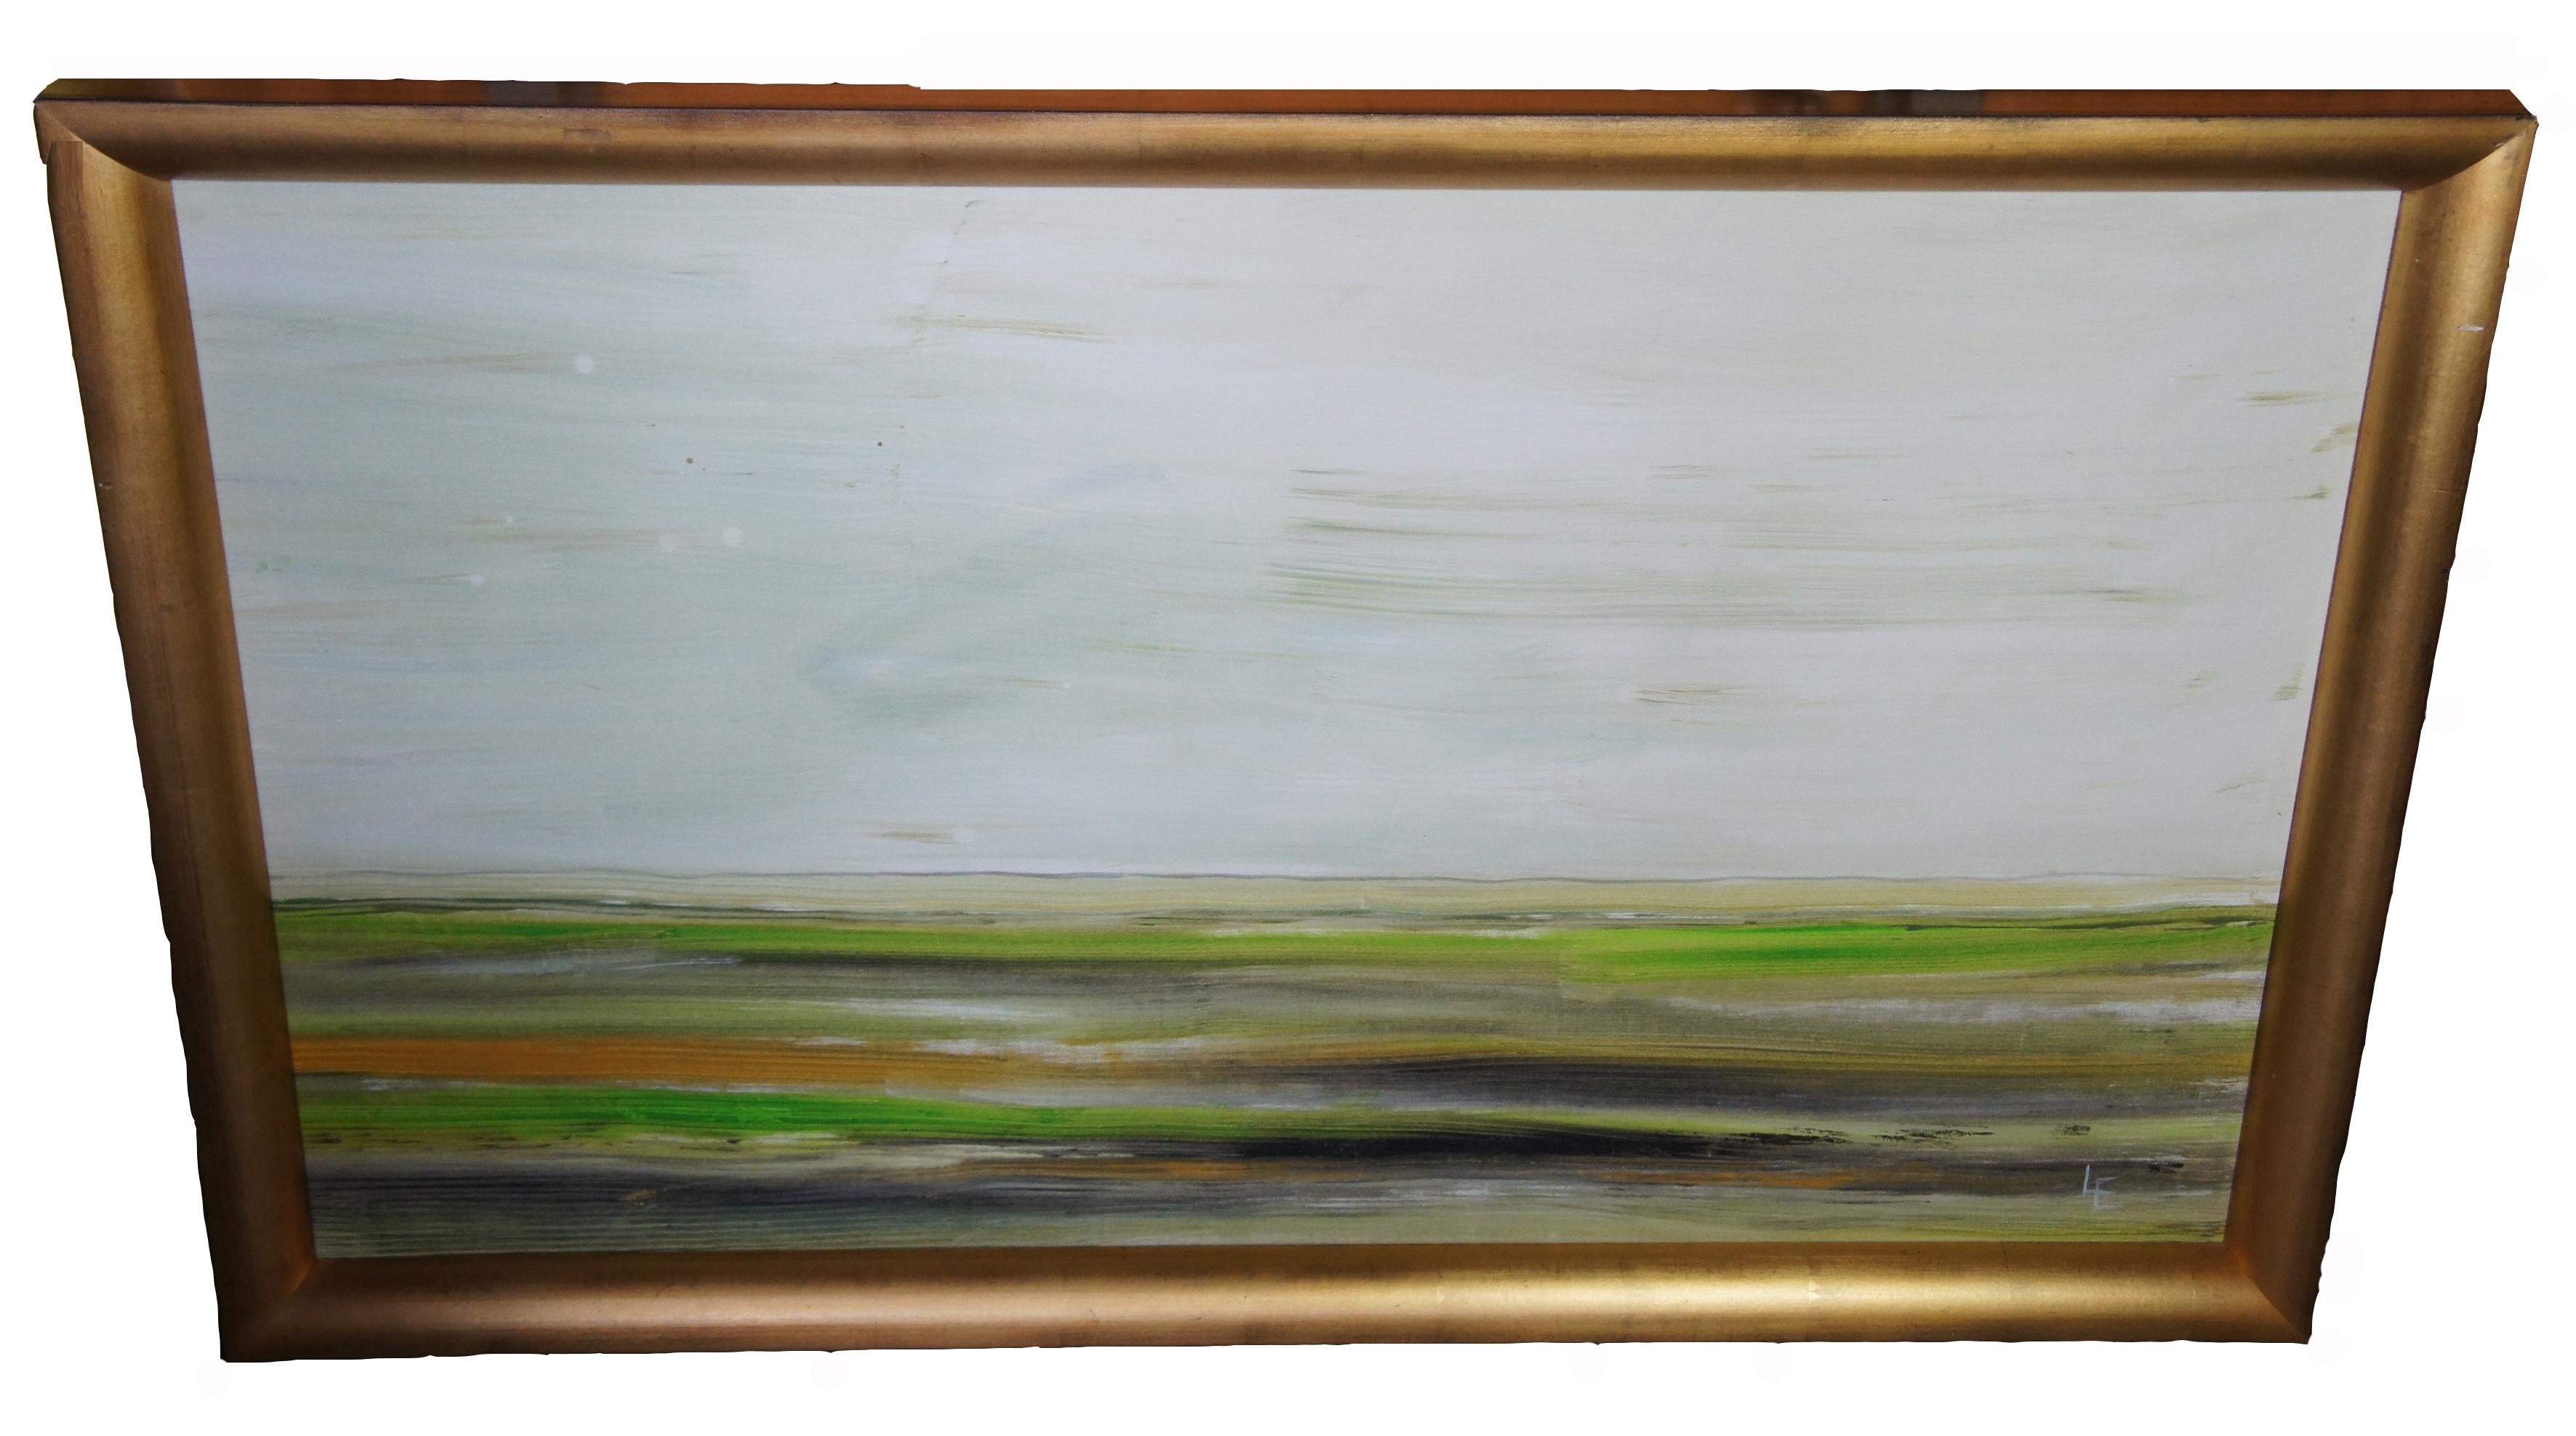 Abstract impressionist landscape signed LE. Features land along the horizon with greens and blues and oranges, painted by a University of Michigan grad student in the 1990s. Oil on canvas, framed in gold.

Measures: 64.5